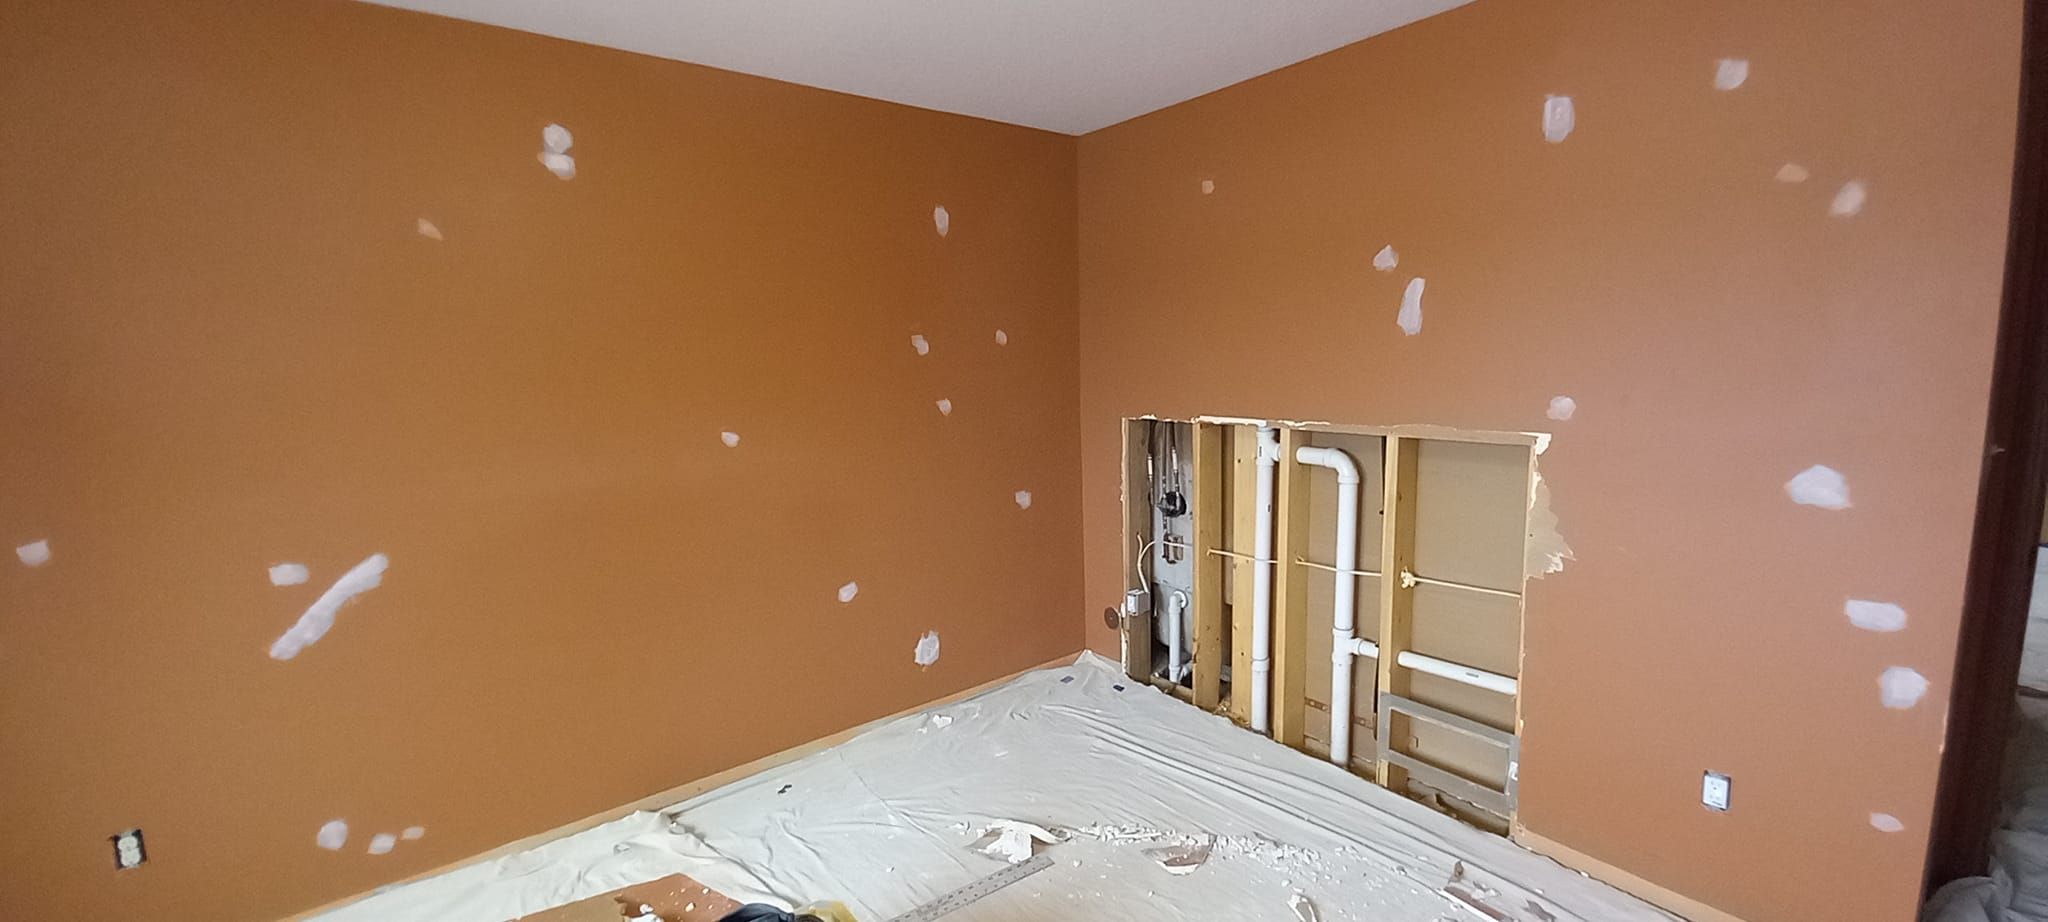 All Photos for M&M's Painting and Drywall in Red Wing,  Minnesotta